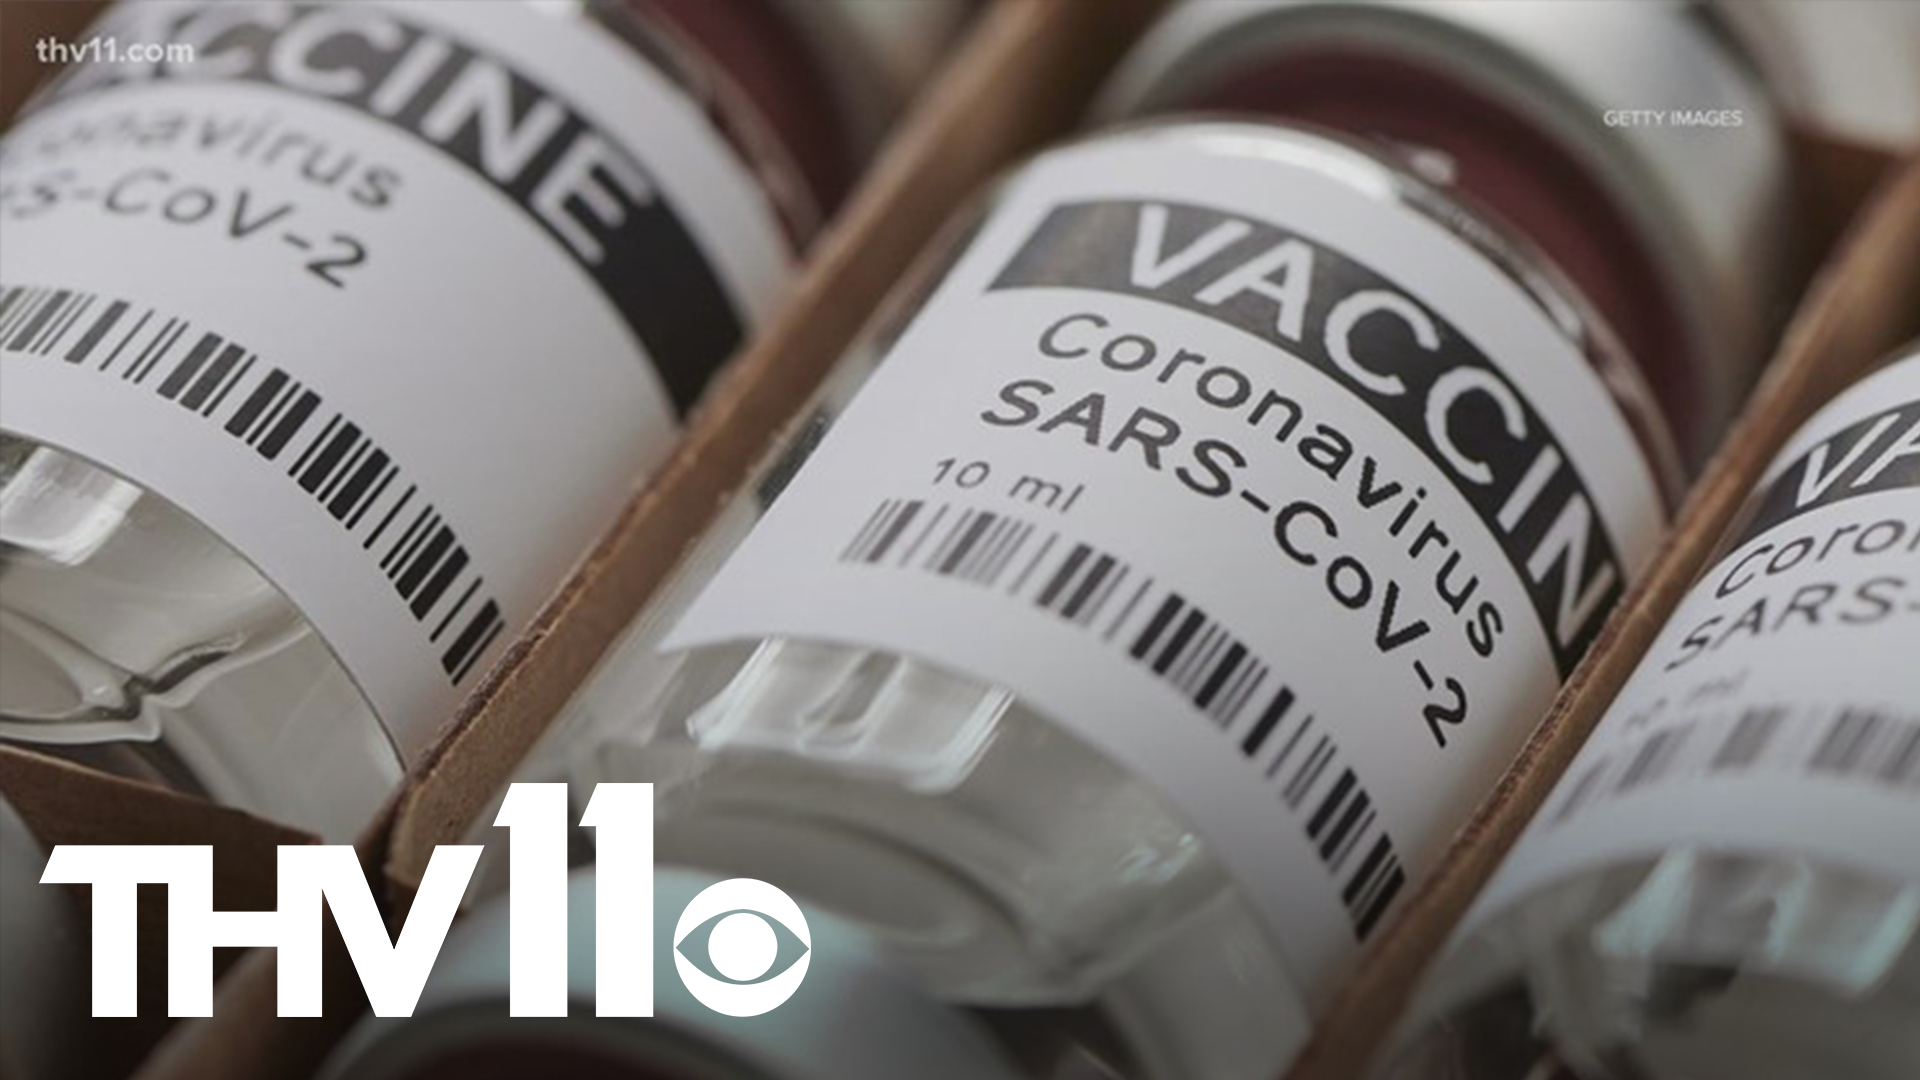 While we continue to move down the pipeline of who's next to receive the COVID-19 vaccine, some are wondering if an employer can require it.